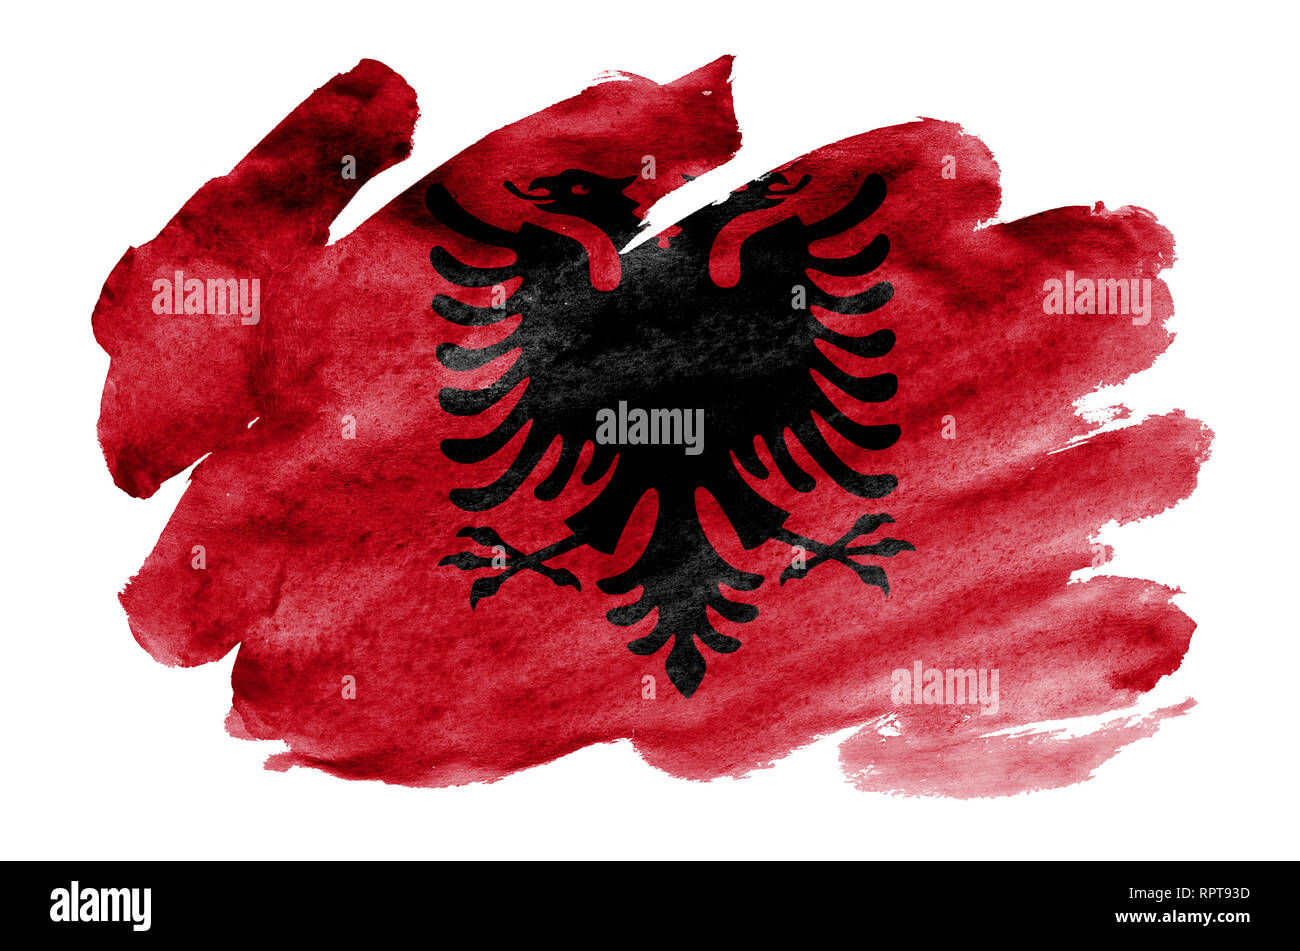 Albania flag  is depicted in liquid watercolor style isolated on white background. Careless paint shading with image of national flag. Independence Da Stock Photo